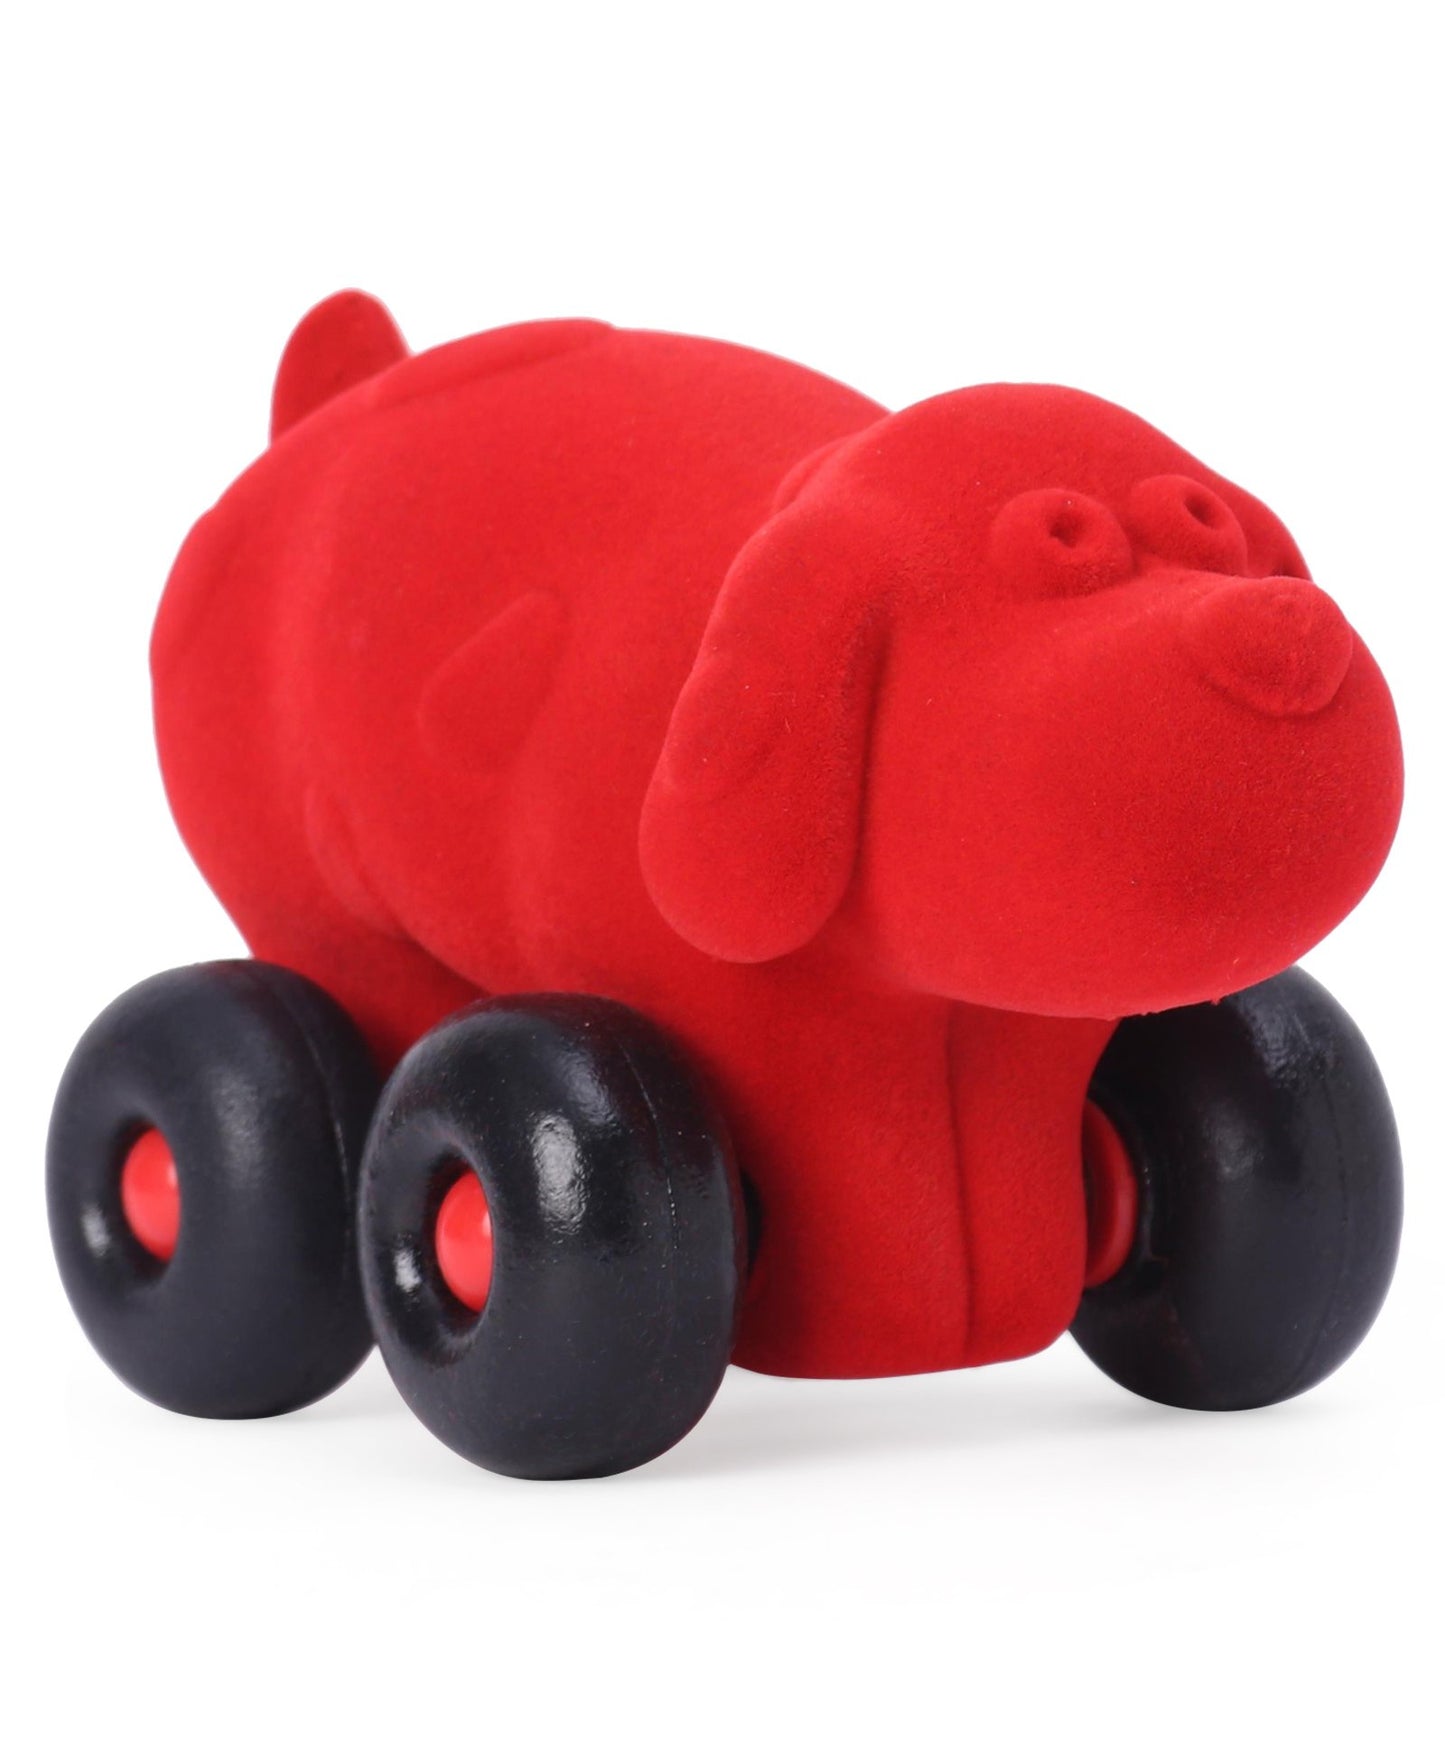 Rubbabu Free Wheel Little Animal Shaped Toy Cars - Pack of 6 (Colour May Vary)